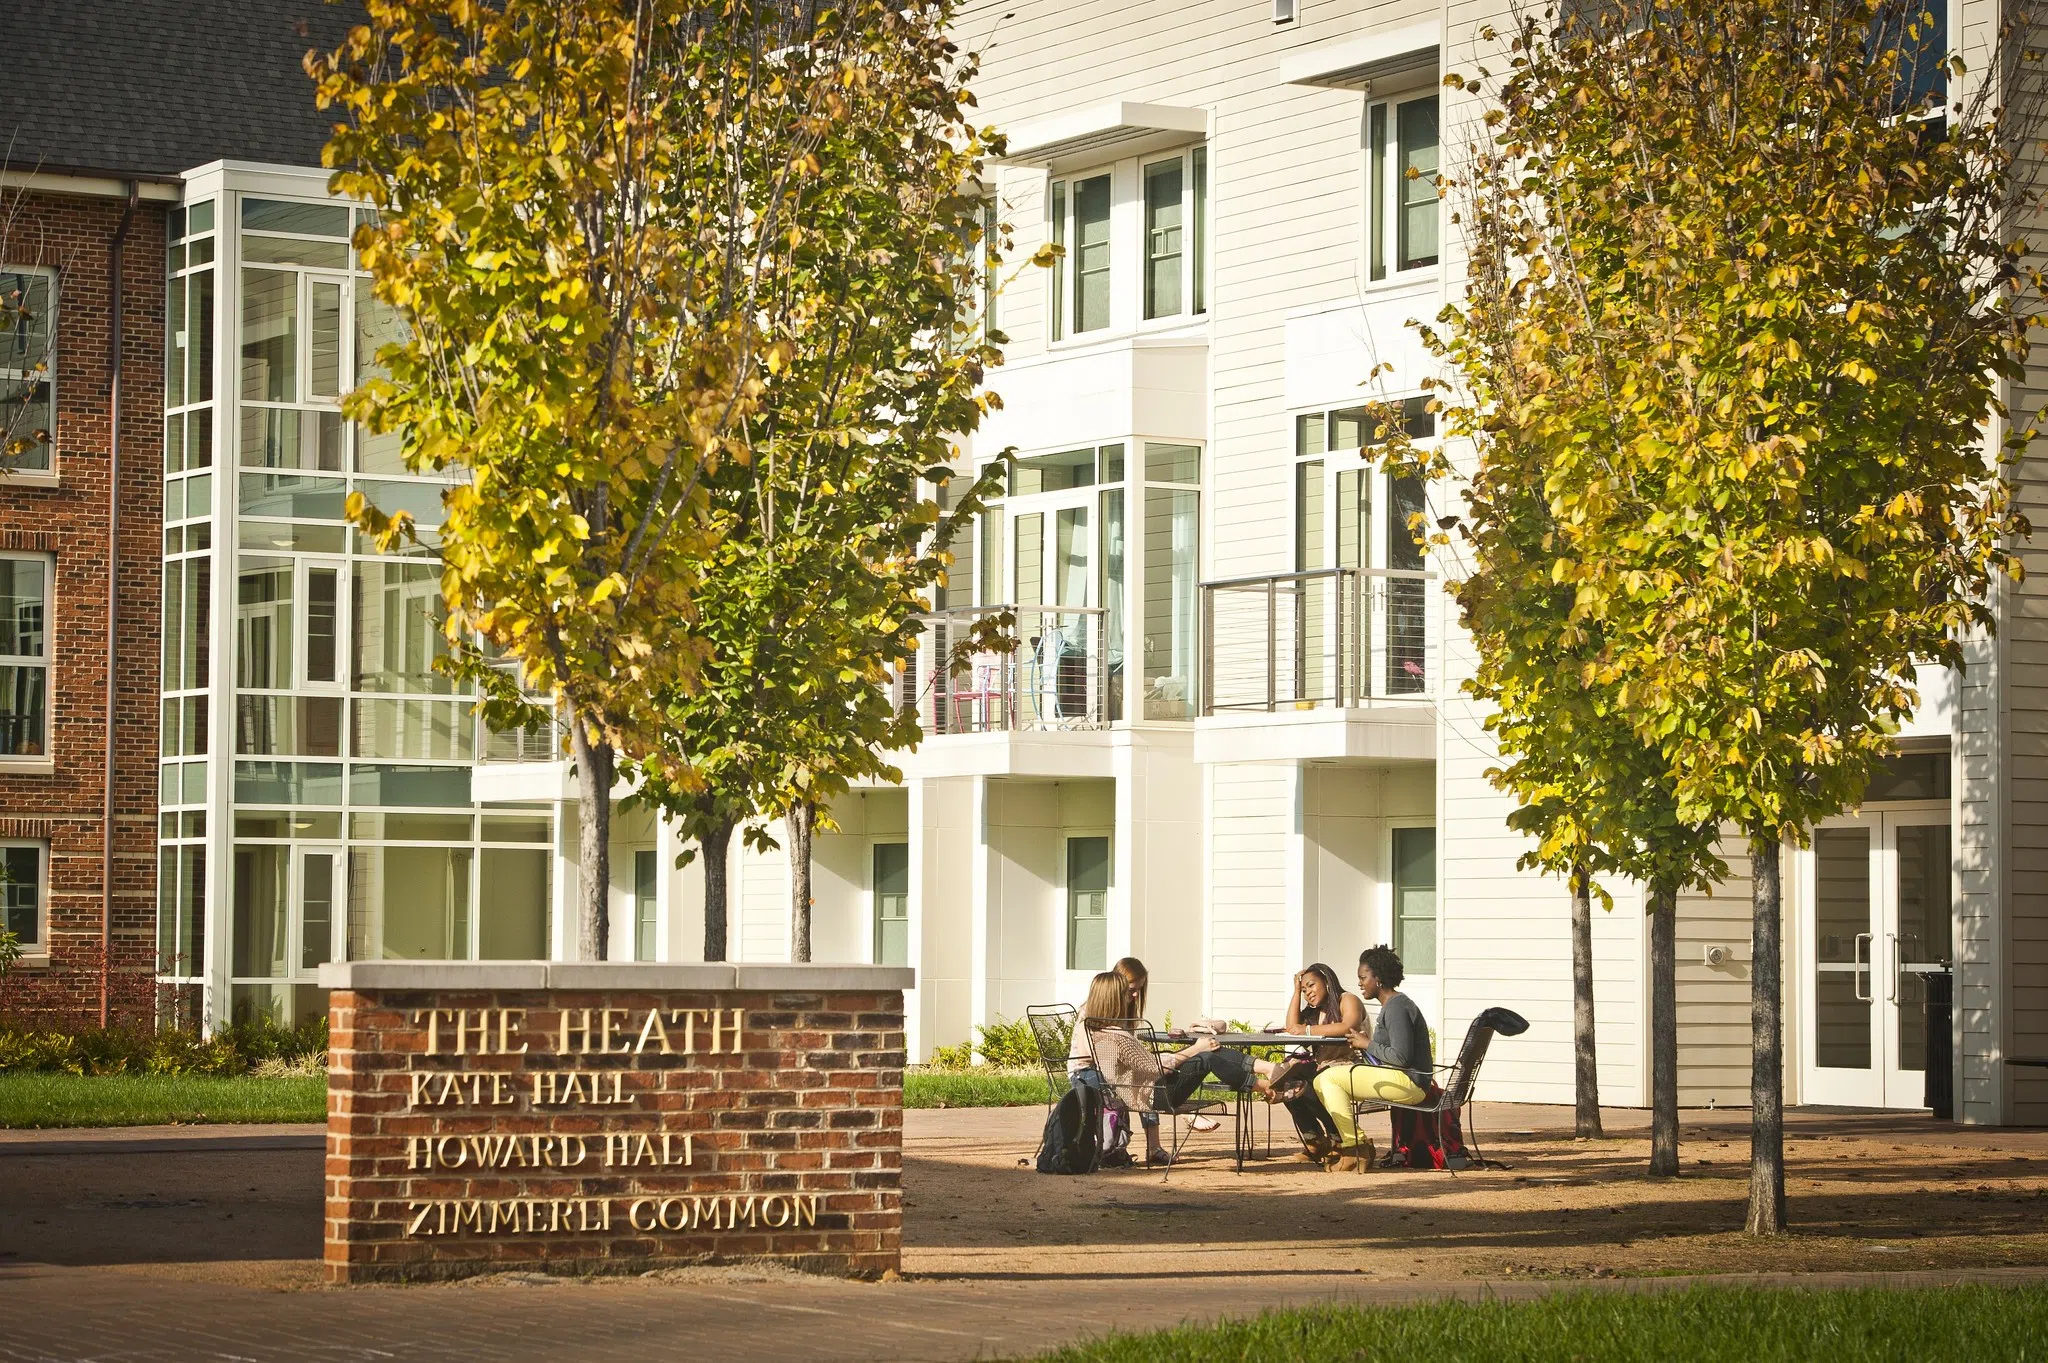 Four students sit at an outdoor table in front of a three story building. A sign in the foregrounds says "The Heath. Kate Hall. Howard Hall. Zimmerli Common.